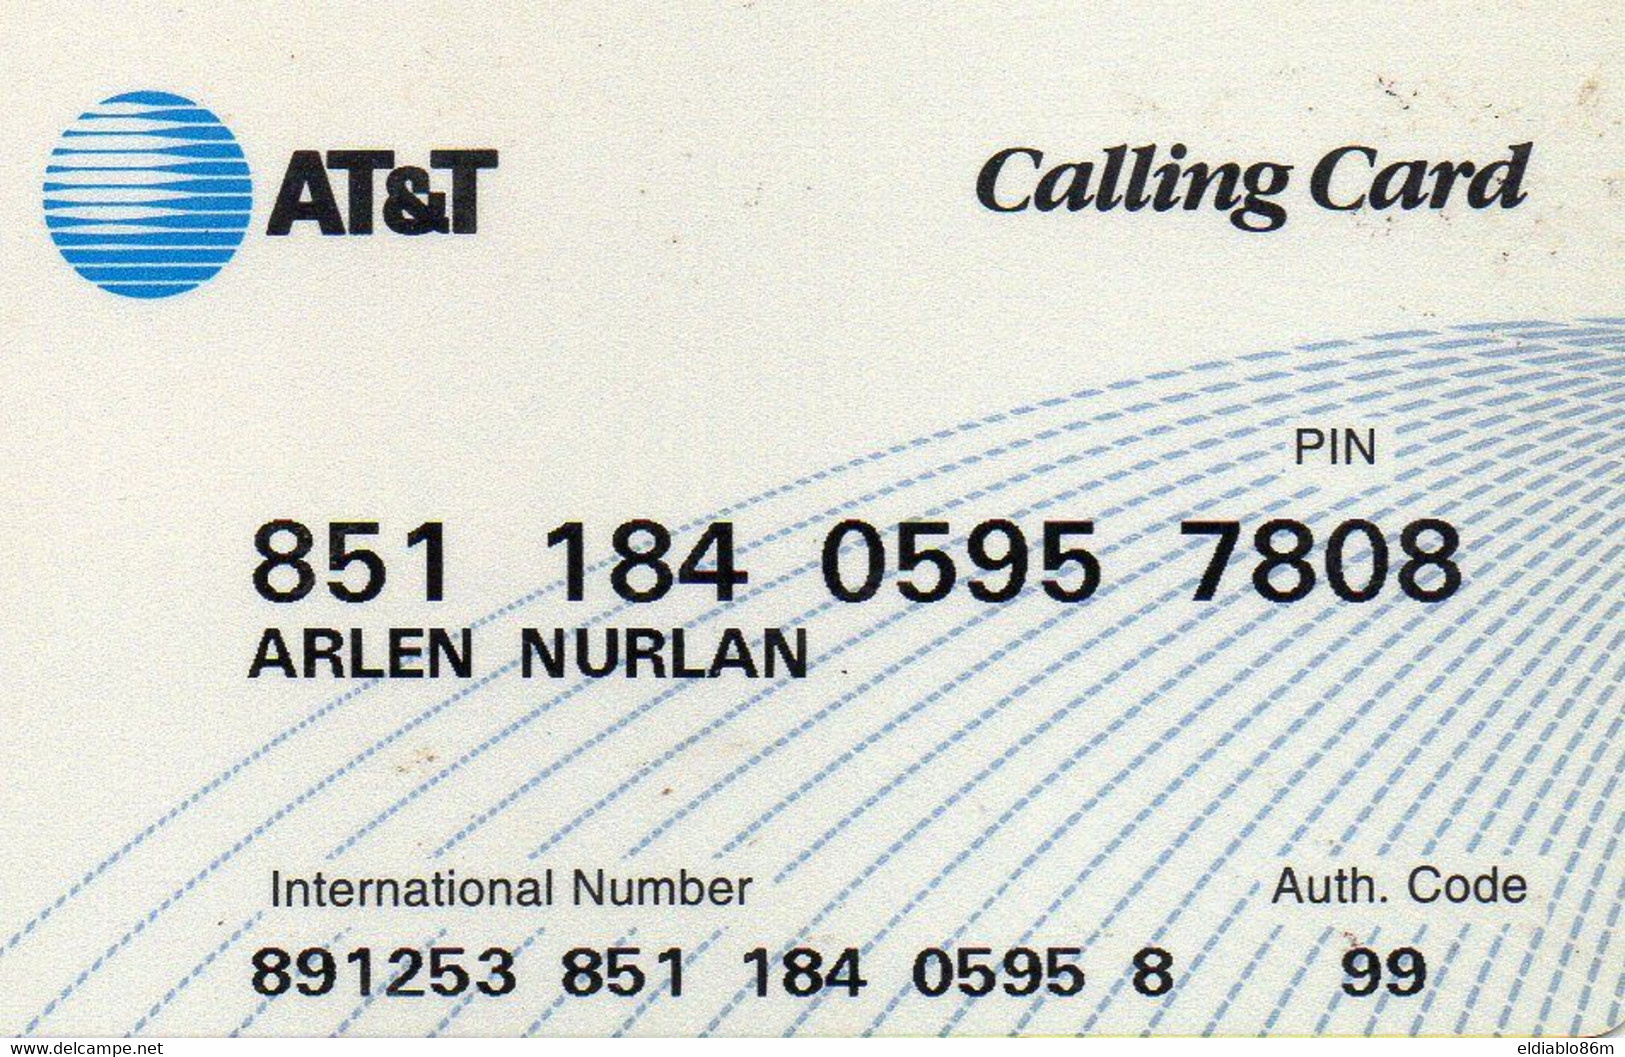 UNITED STATES - MAGNETIC - AT&T CALLING CARD - AT&T